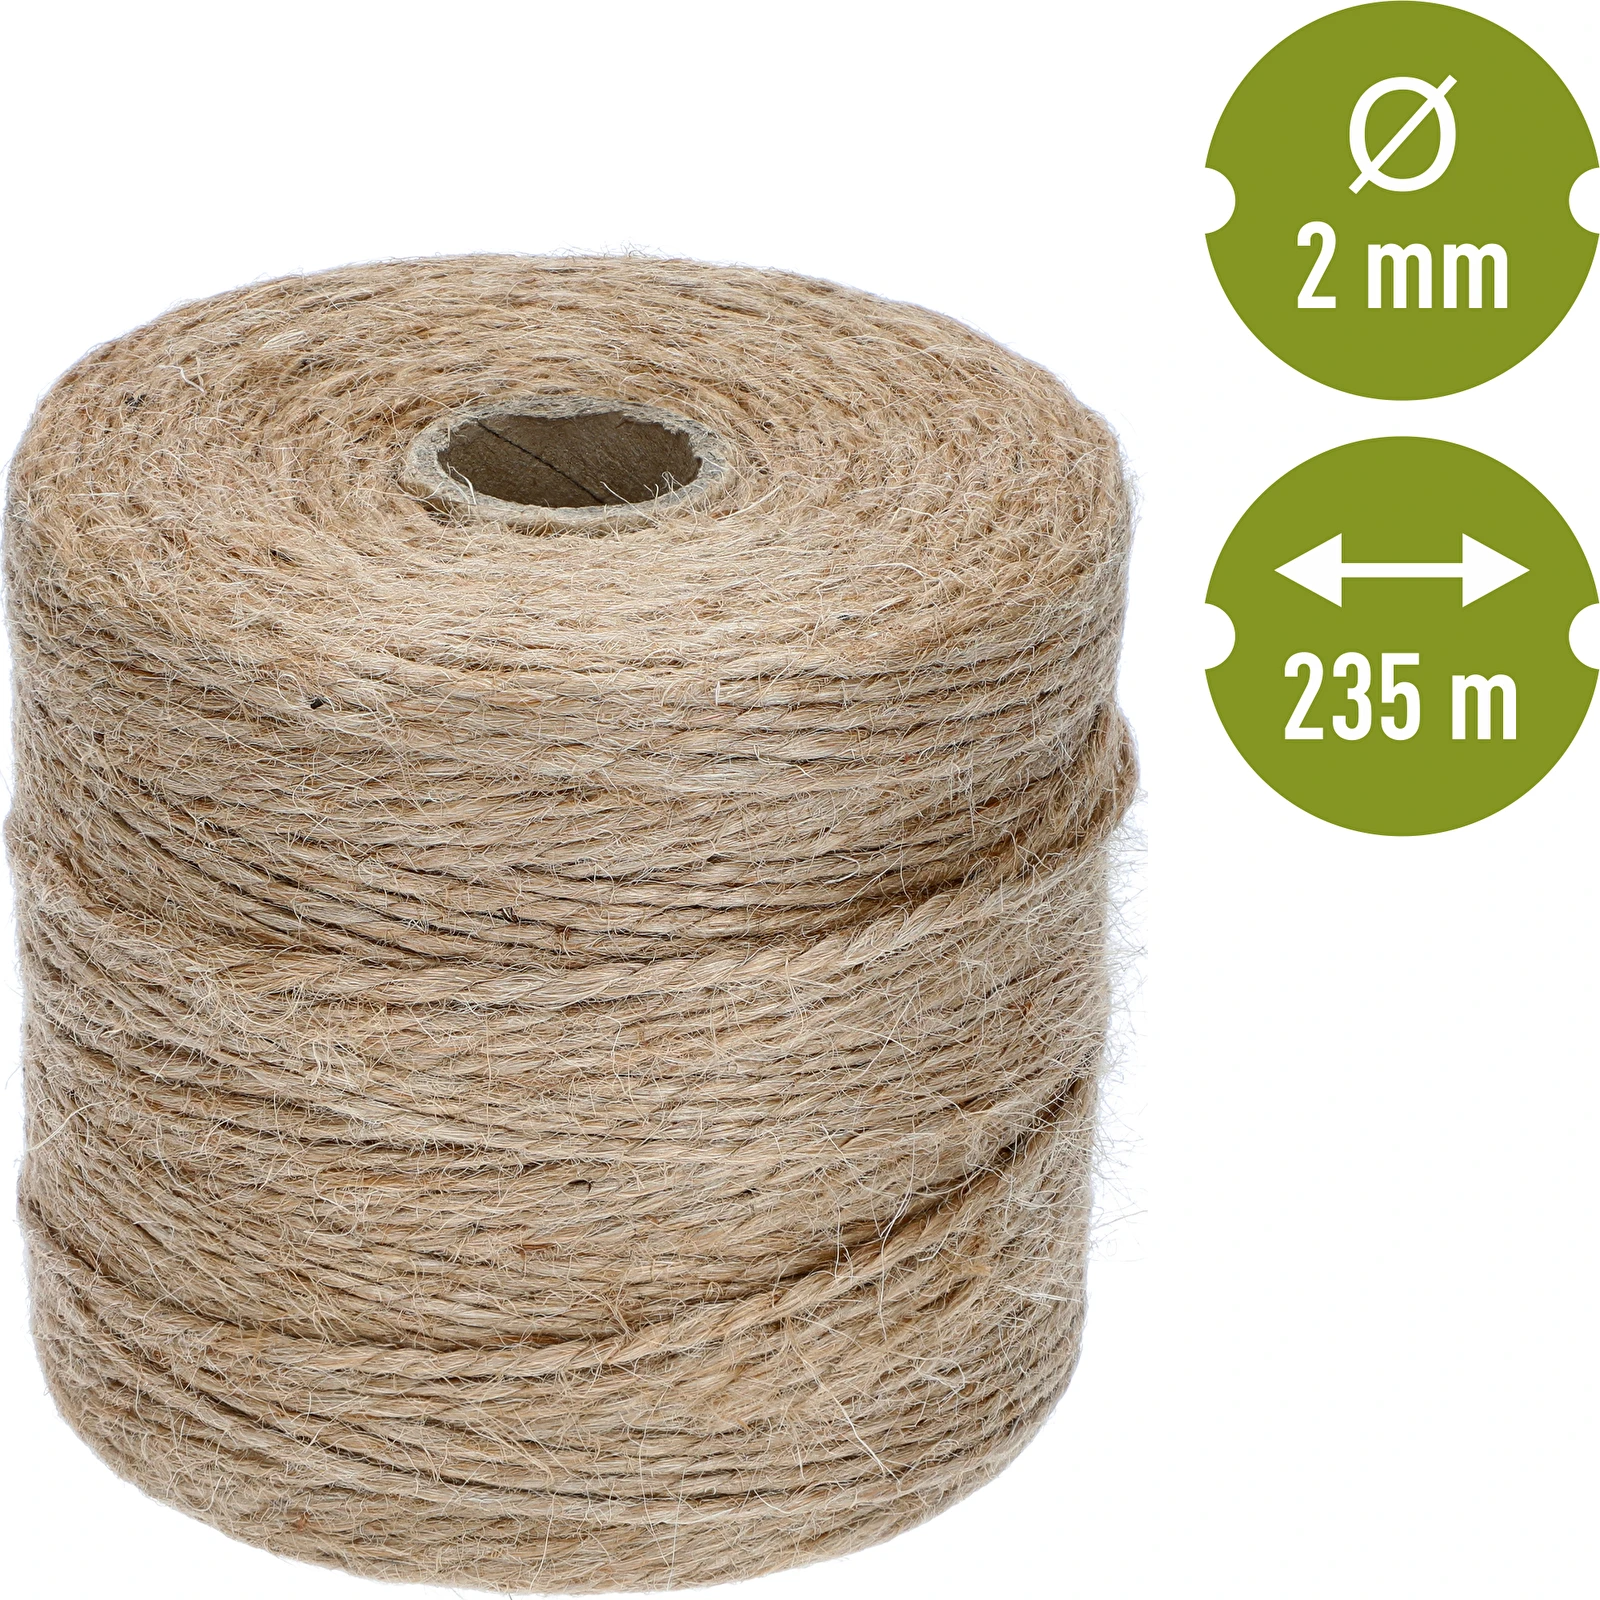 Orbit SMG12107W 250' Roll Of Natural Jute Brown Twine - Quantity of 6